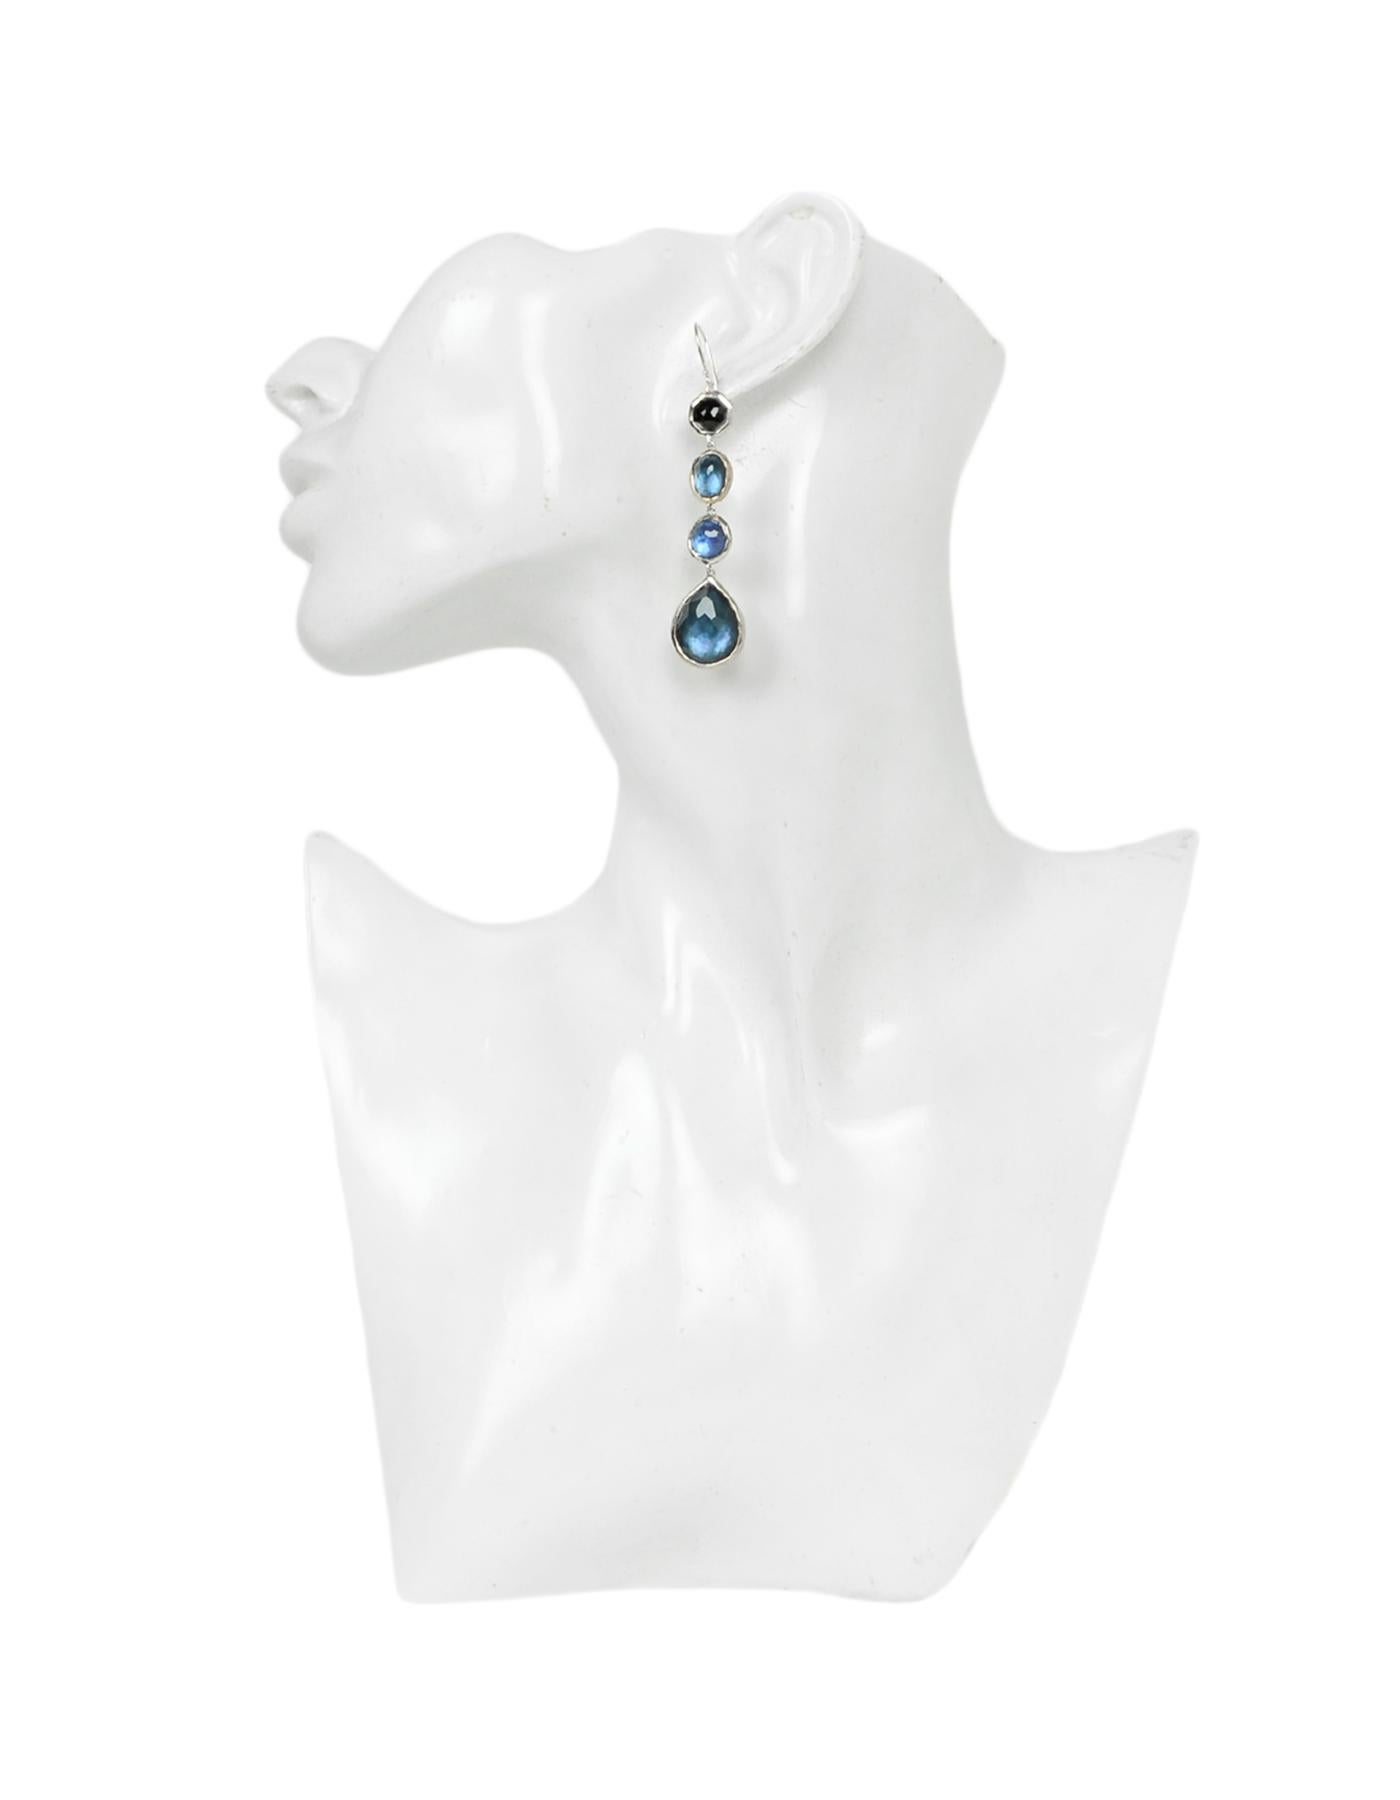 Ippolita Silver Onyx and Blue Mother of Pearl Hanging Drop Earrings

Color: Silver, Blue, Black
Materials: Silver, Onyx, Mother of Pearl
Hallmarks: 